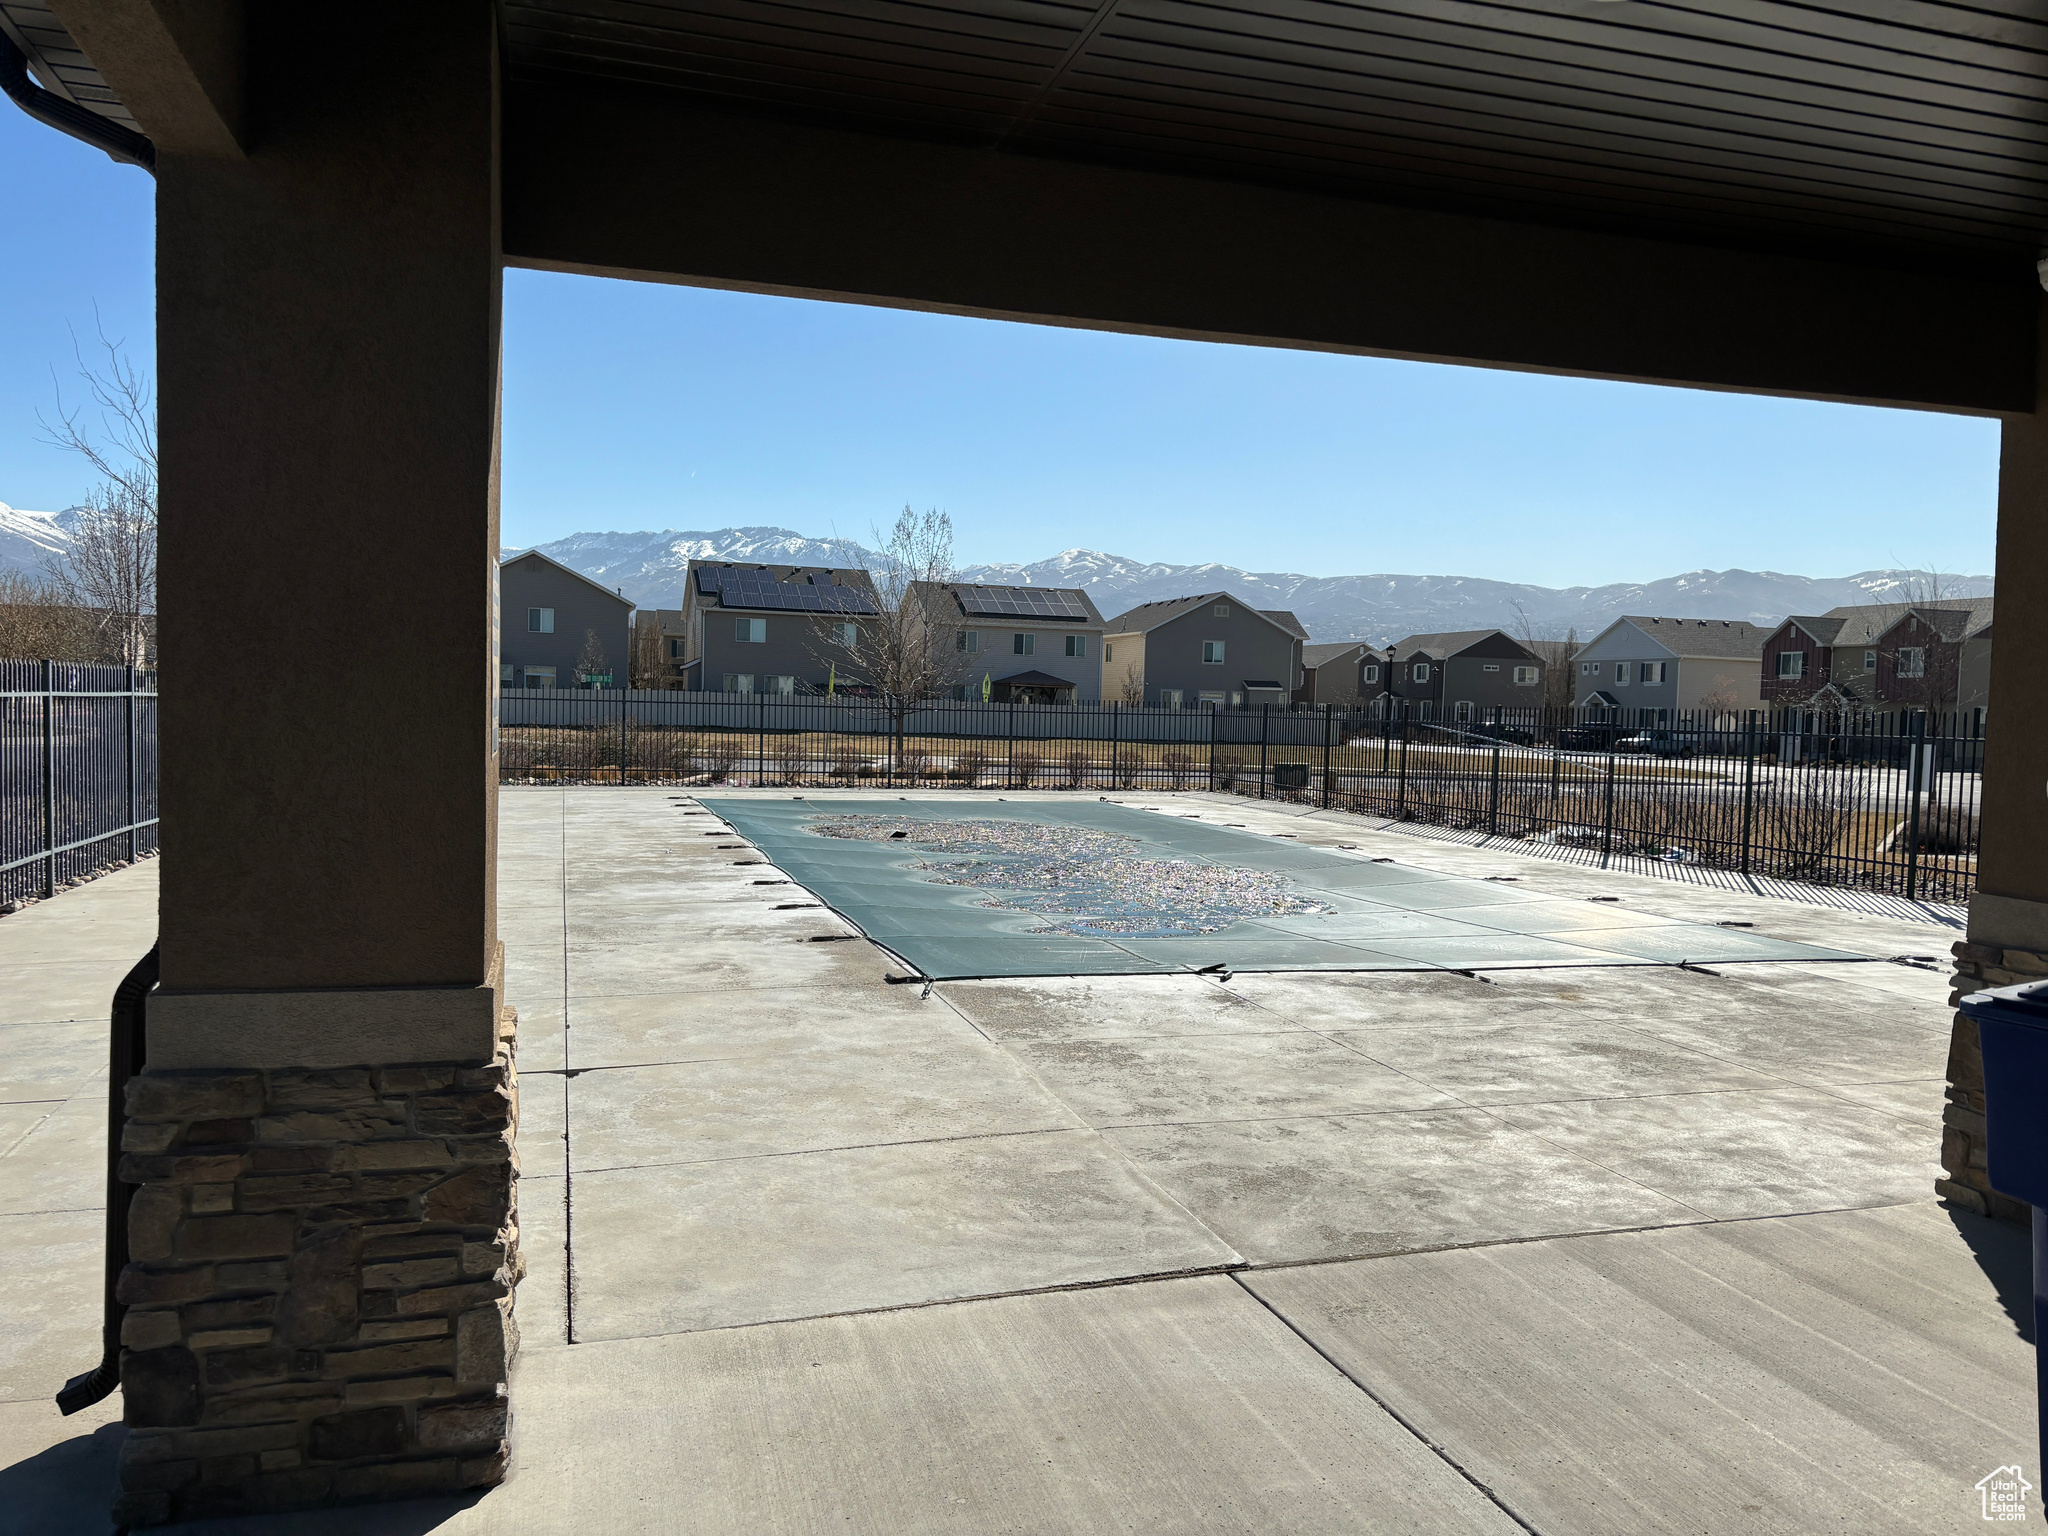 Smaller club house pool